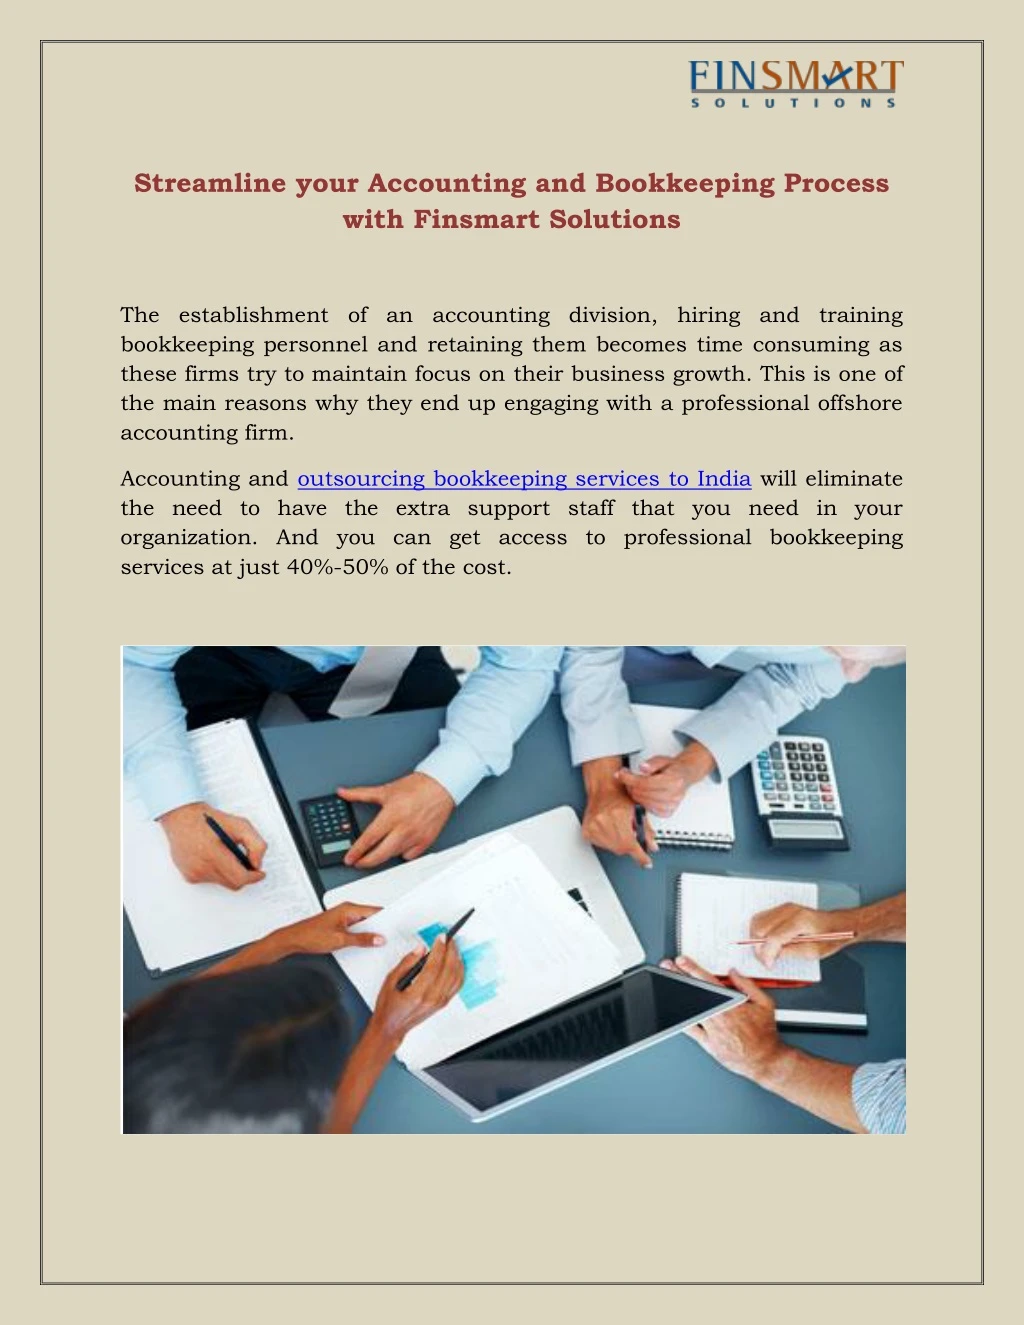 streamline your accounting and bookkeeping